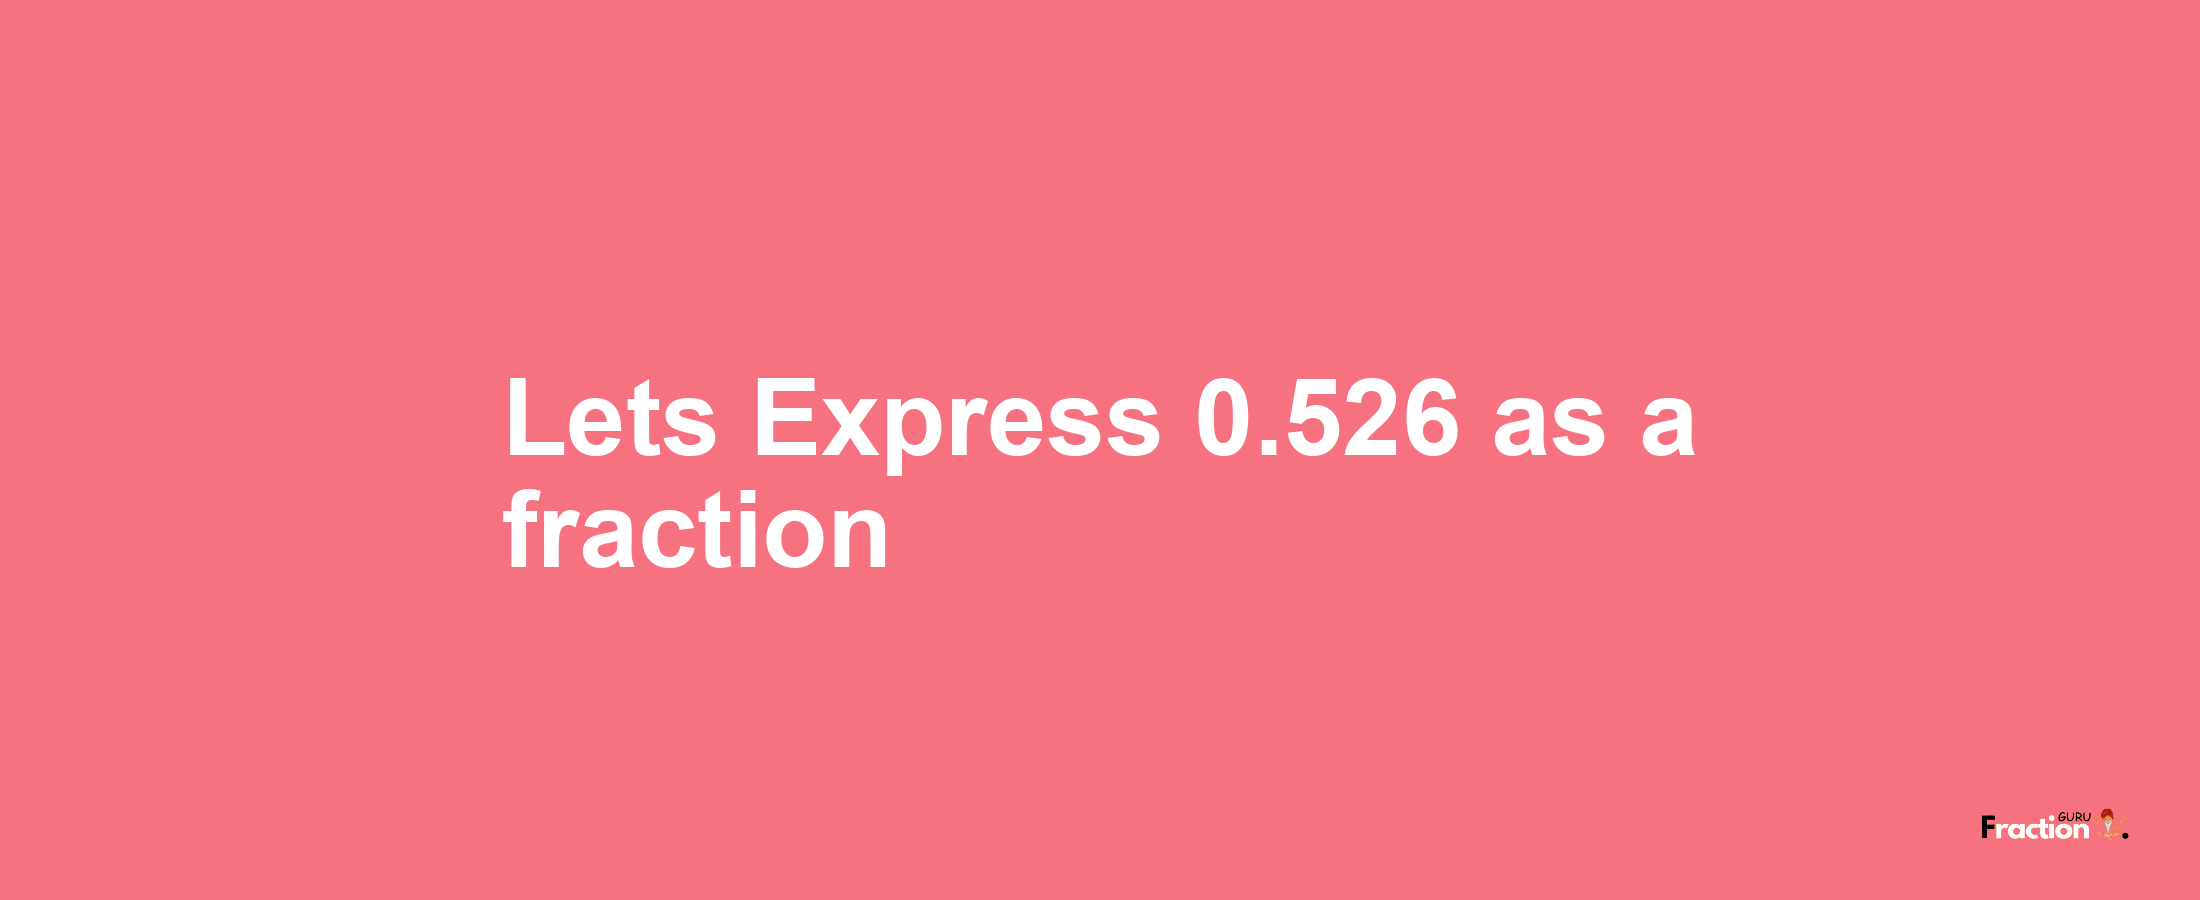 Lets Express 0.526 as afraction